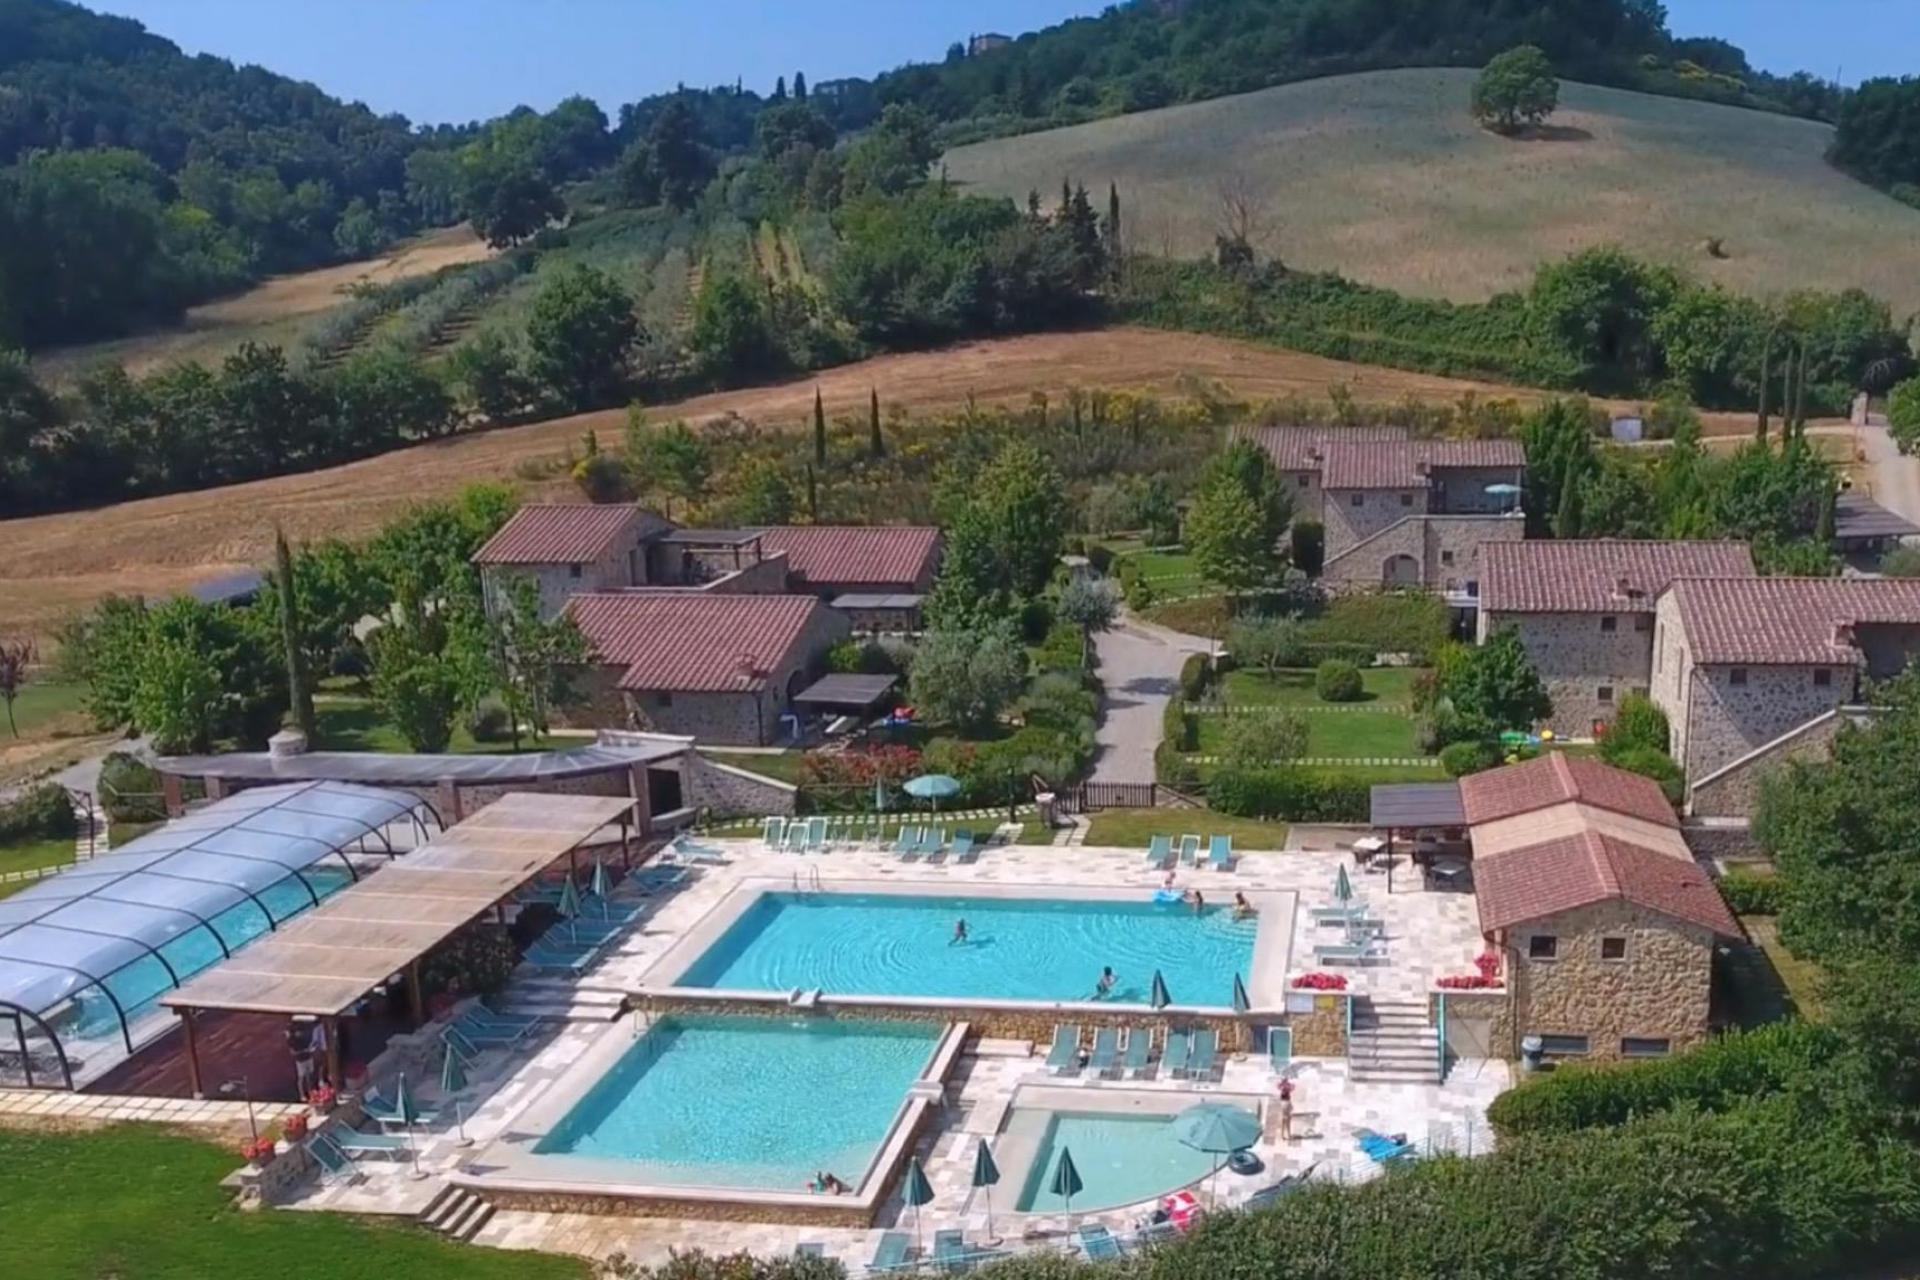 Beautiful country resort in central Tuscany